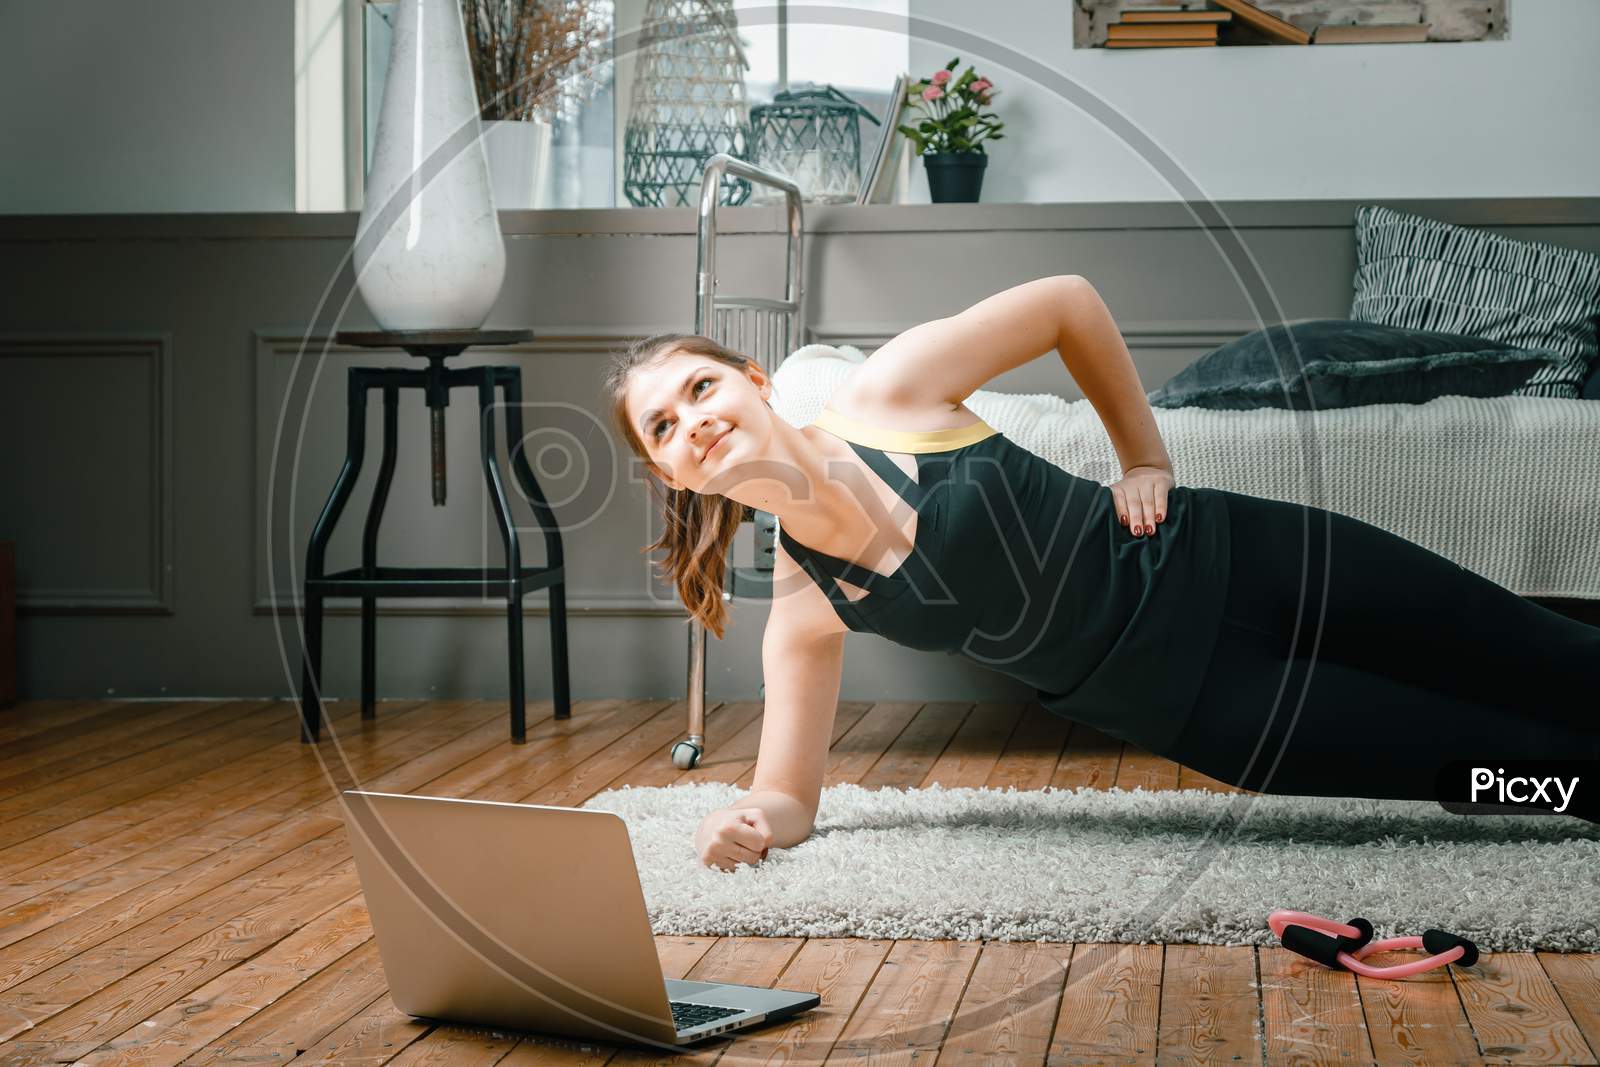 The Young Woman Goes In For Sports At Home. Sportsman With Black Hair Makes A Plank, Watches A Movie And Studies From A Laptop  On Carpet In Bedroom